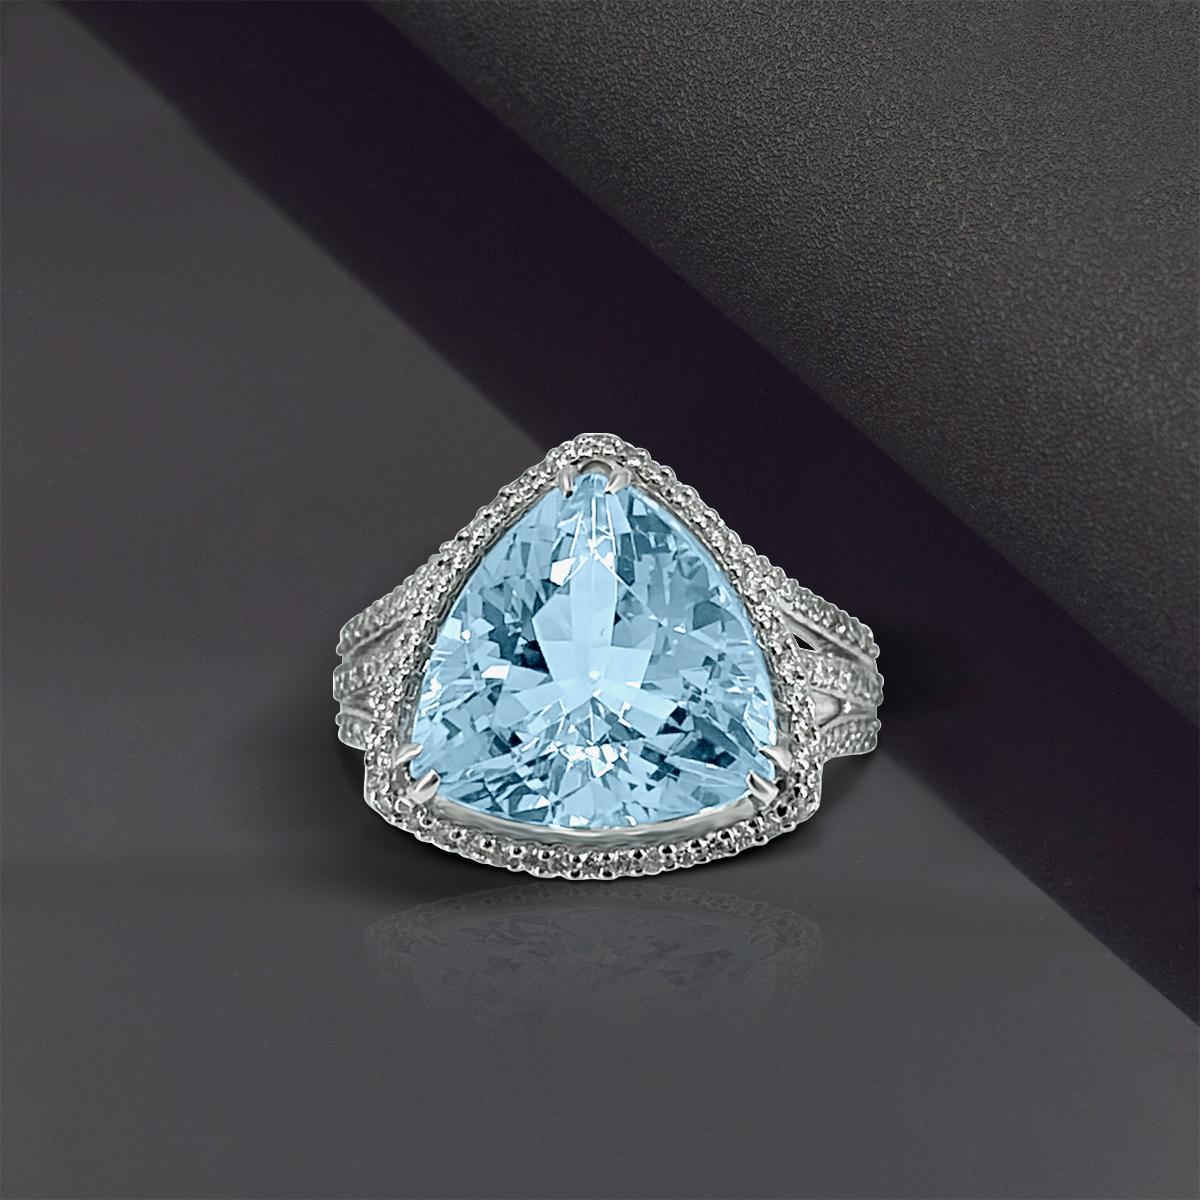 14K White Gold 5.61cts Aquamarine and Diamond Ring, Style# R3657 In New Condition For Sale In New York, NY